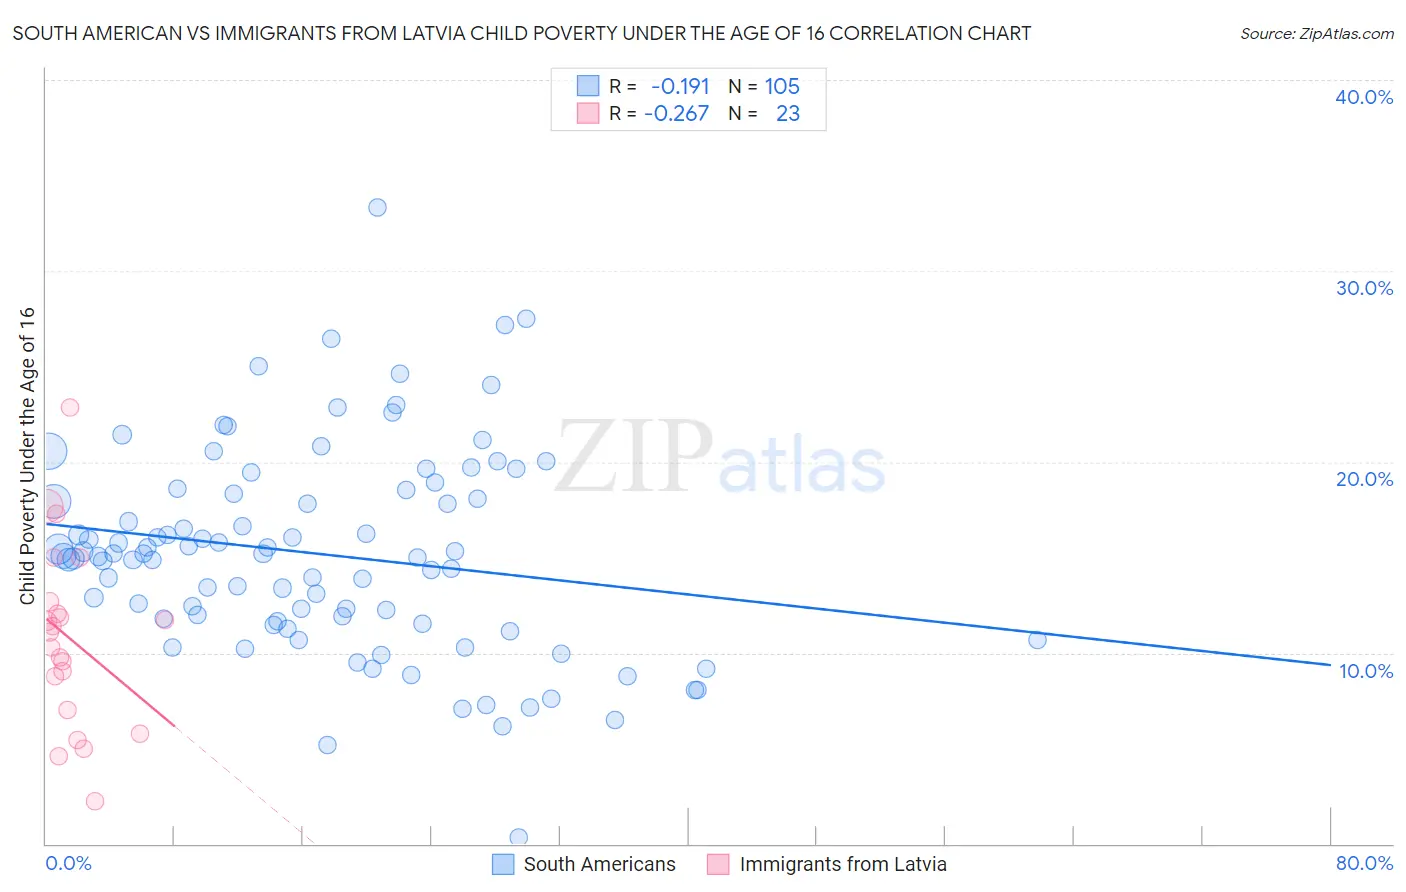 South American vs Immigrants from Latvia Child Poverty Under the Age of 16